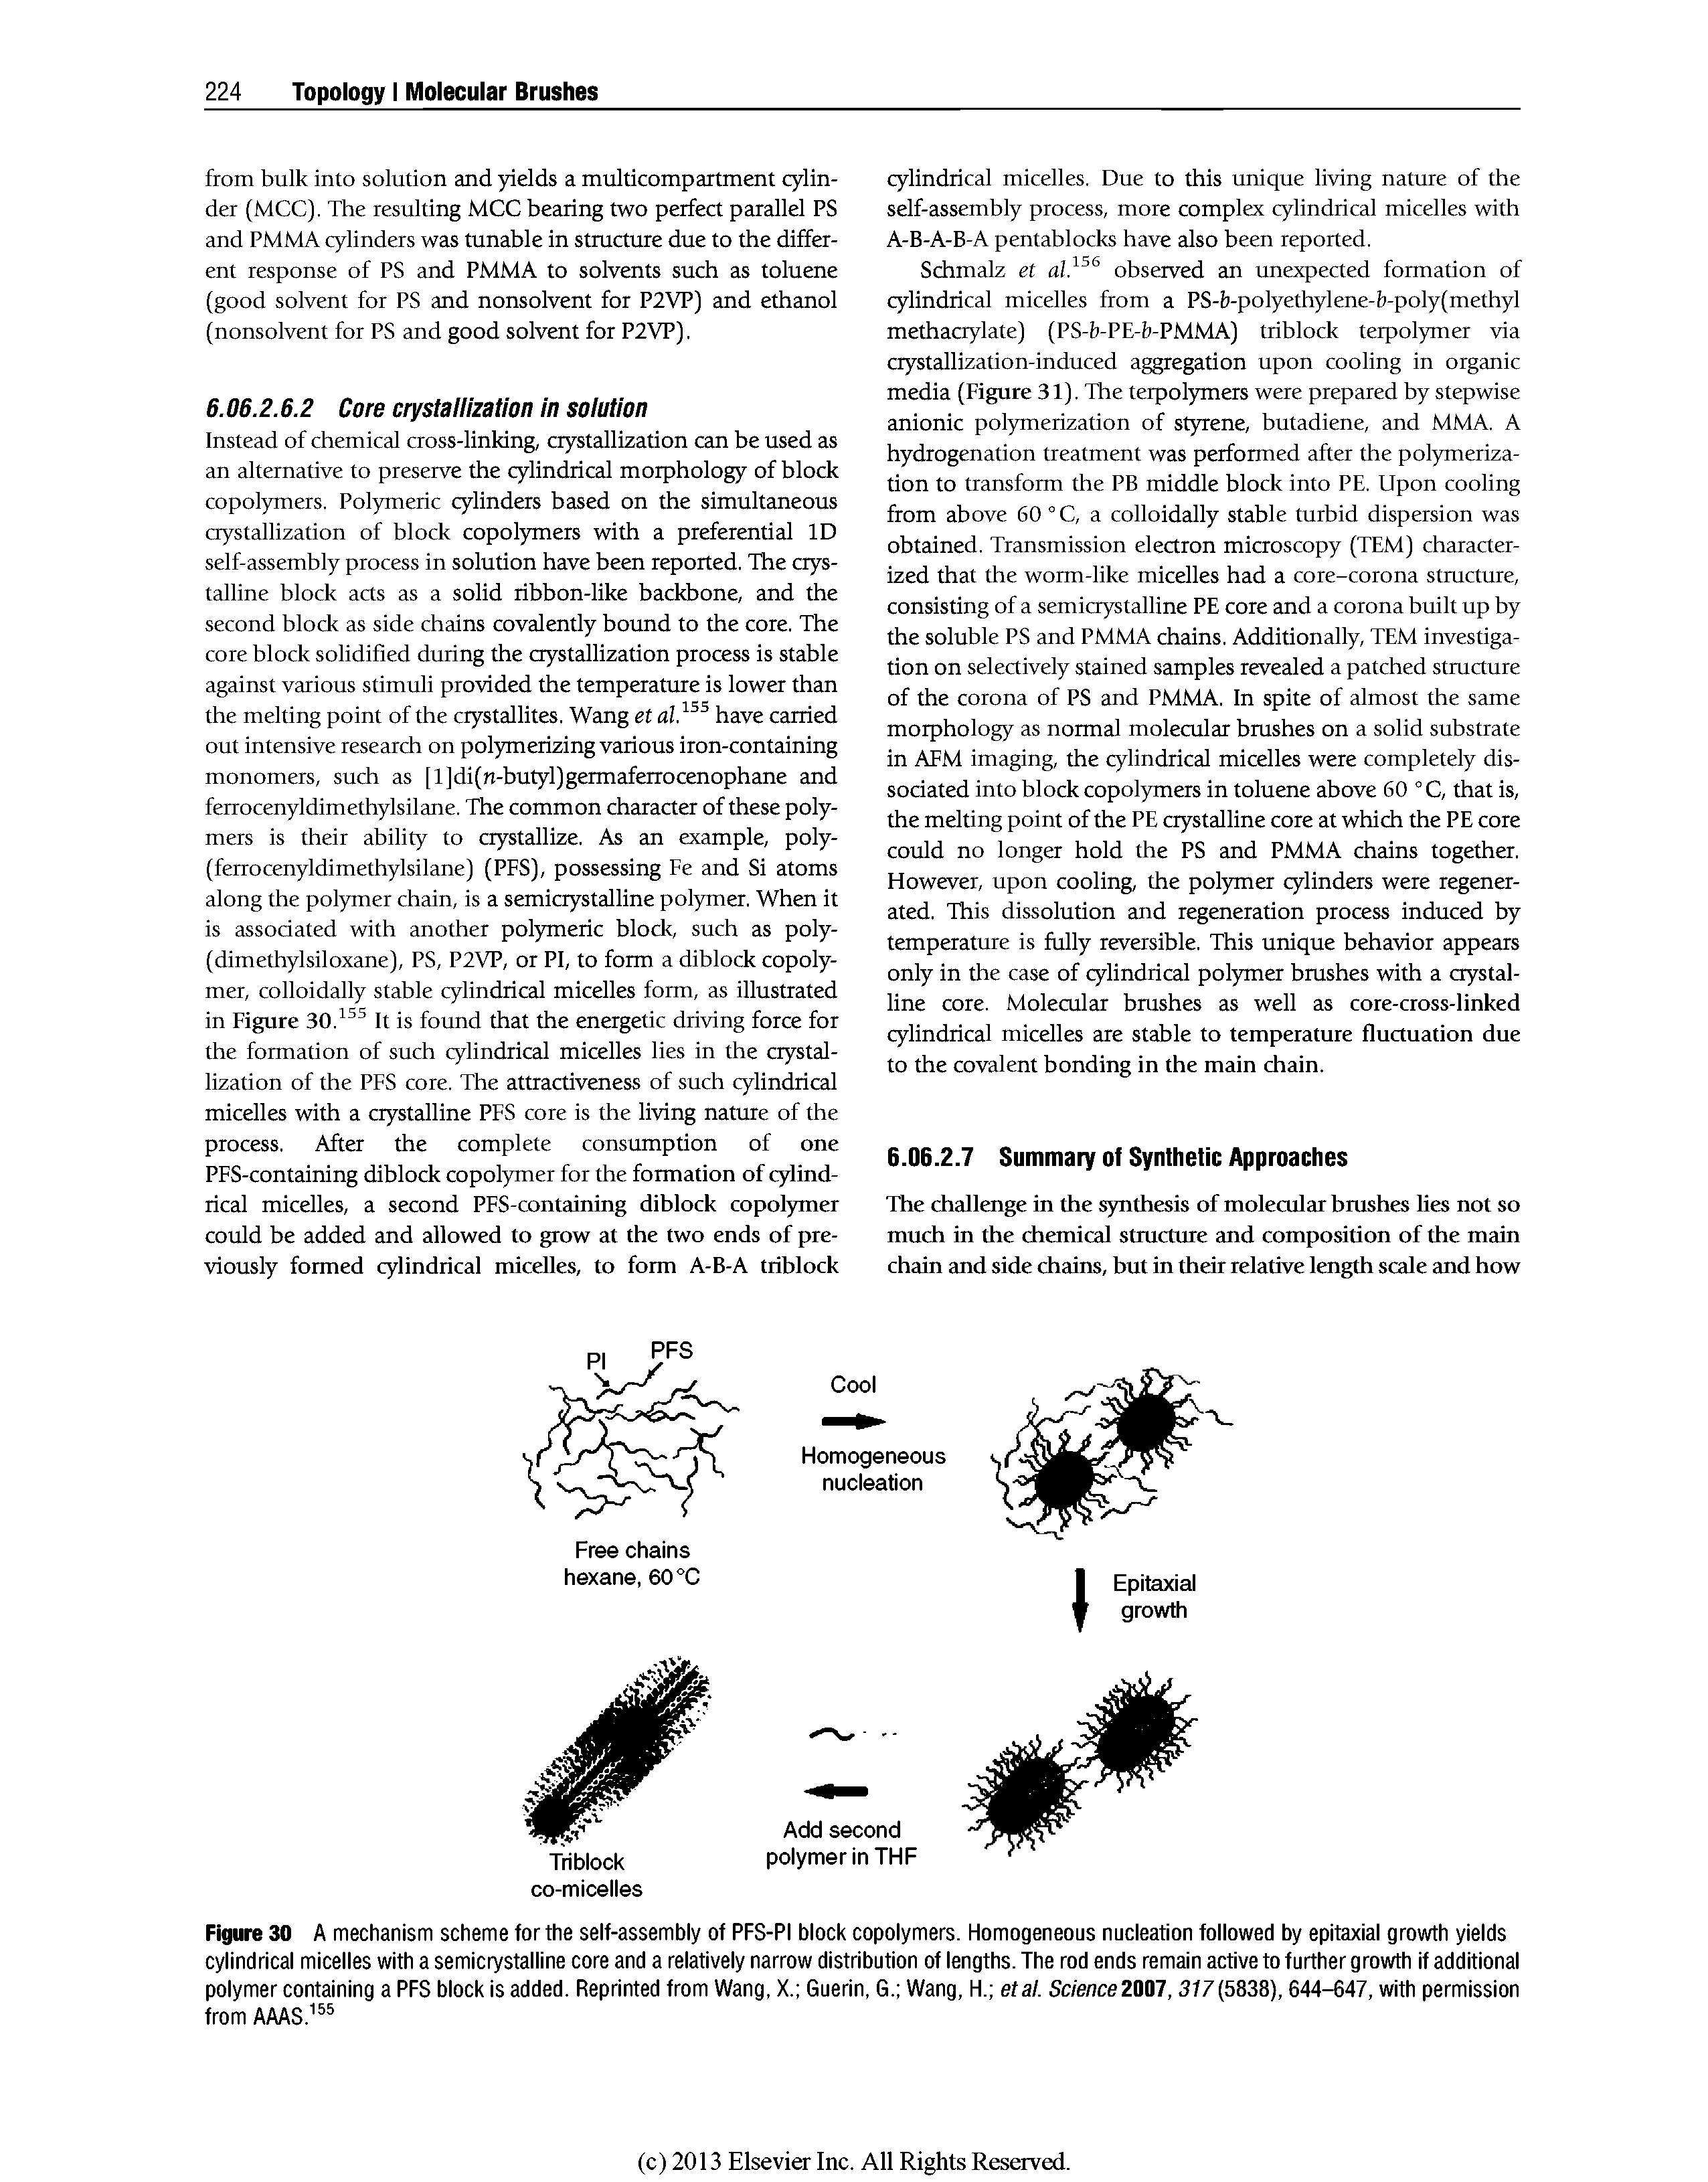 Figure 30 A mechanism scheme for the self-assembly of PFS-PI block copolymers. Homogeneous nucleatlon followed by epitaxial growth yields cylindrical micelles with a semicrystalline core and a relatively narrow distribution of lengths. The rod ends remain active to further growth if additional polymer containing a PFS block is added. Reprinted from Wang, X. Guerin, G. Wang, H. etal. Sc/ence 2007,317(5838), 644-647, with permission from AAAS. ...